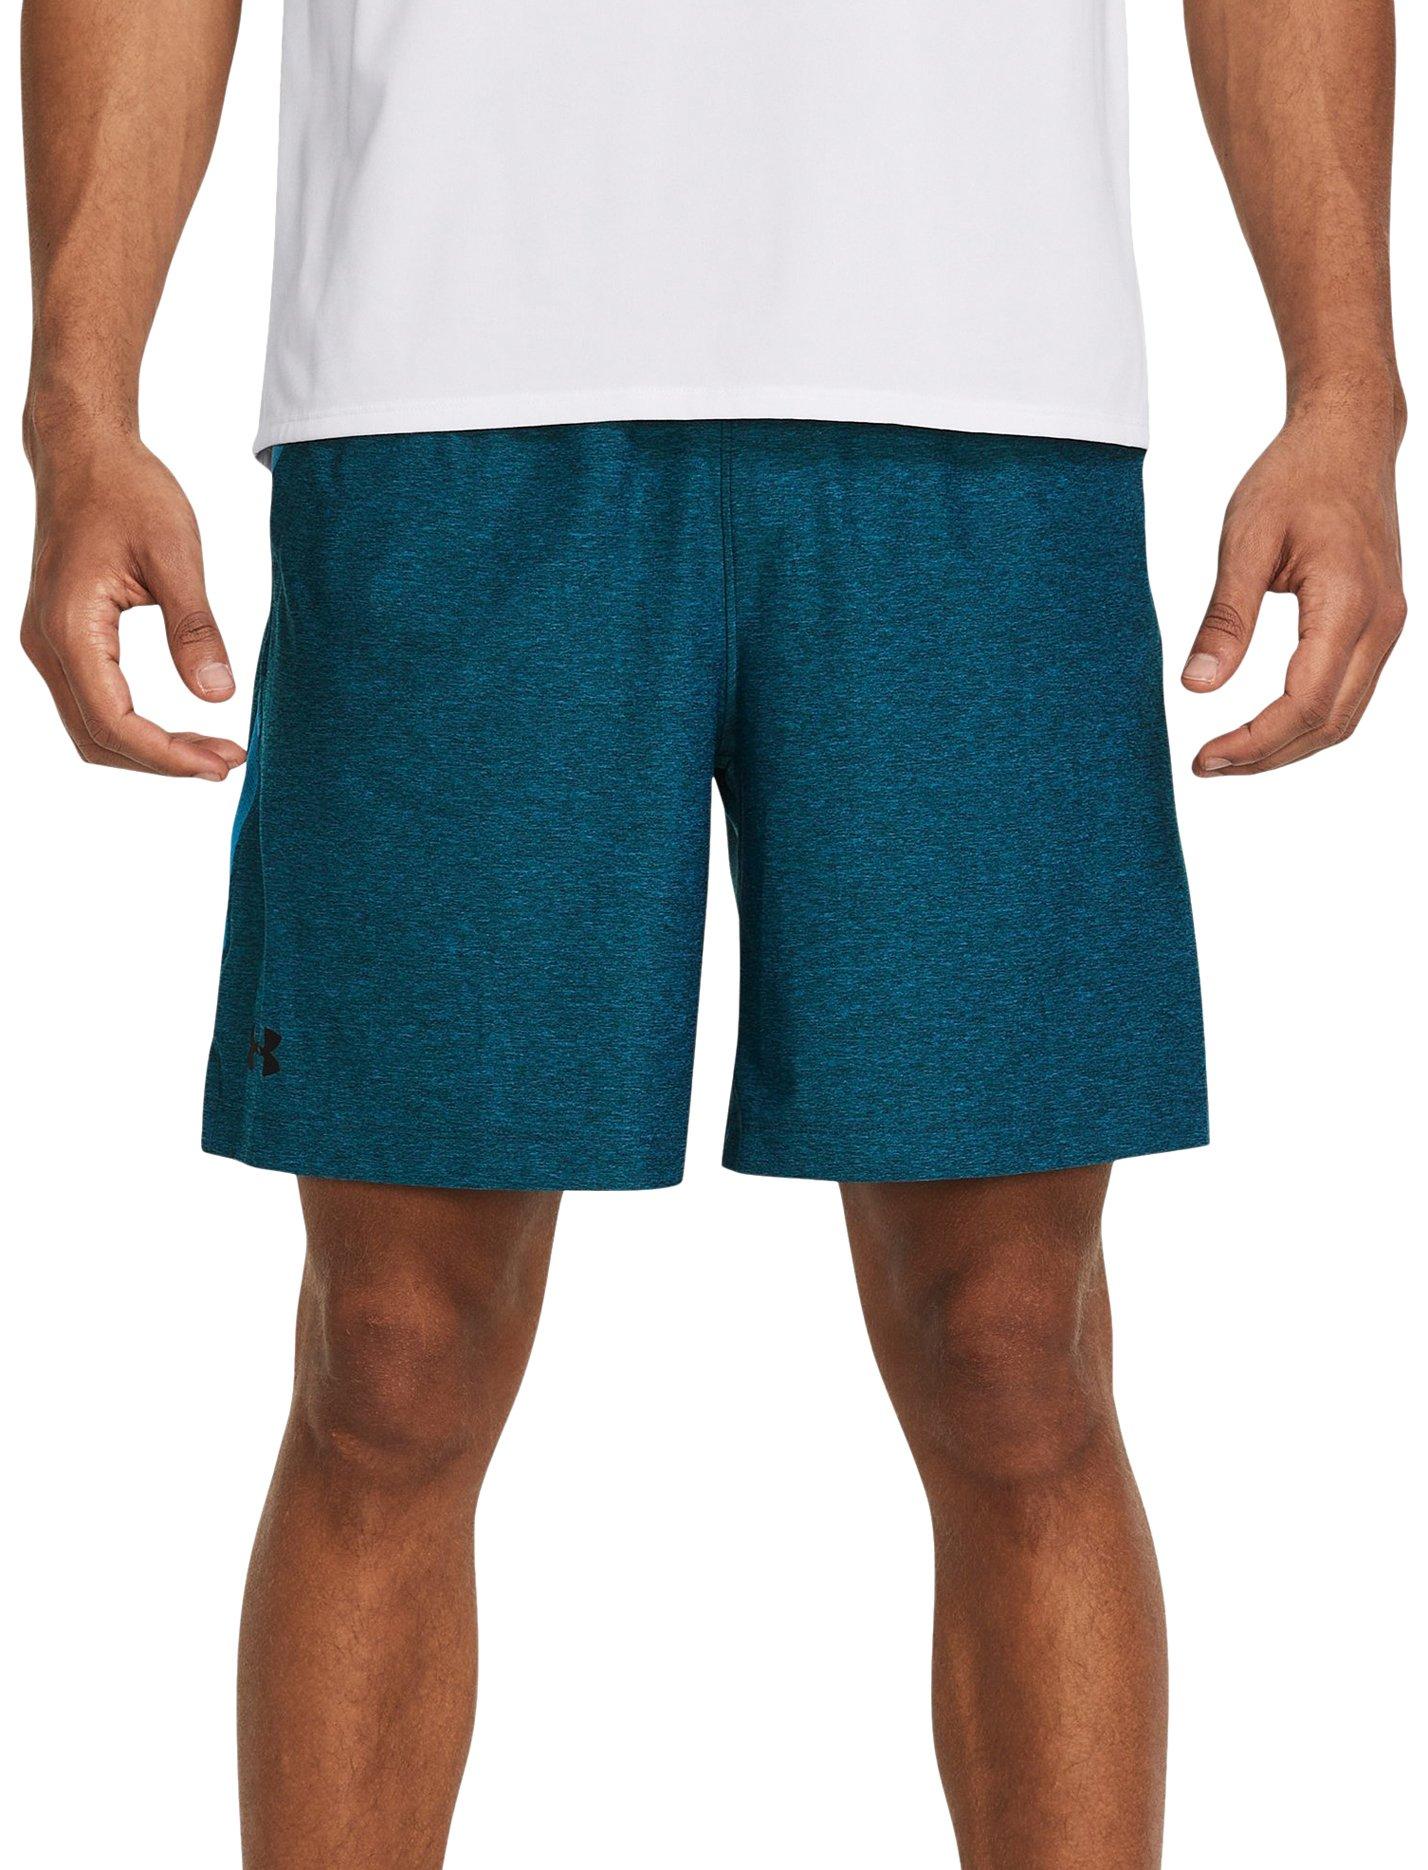 Under Armour Mens 8 in. Woven Tech Vent Shorts